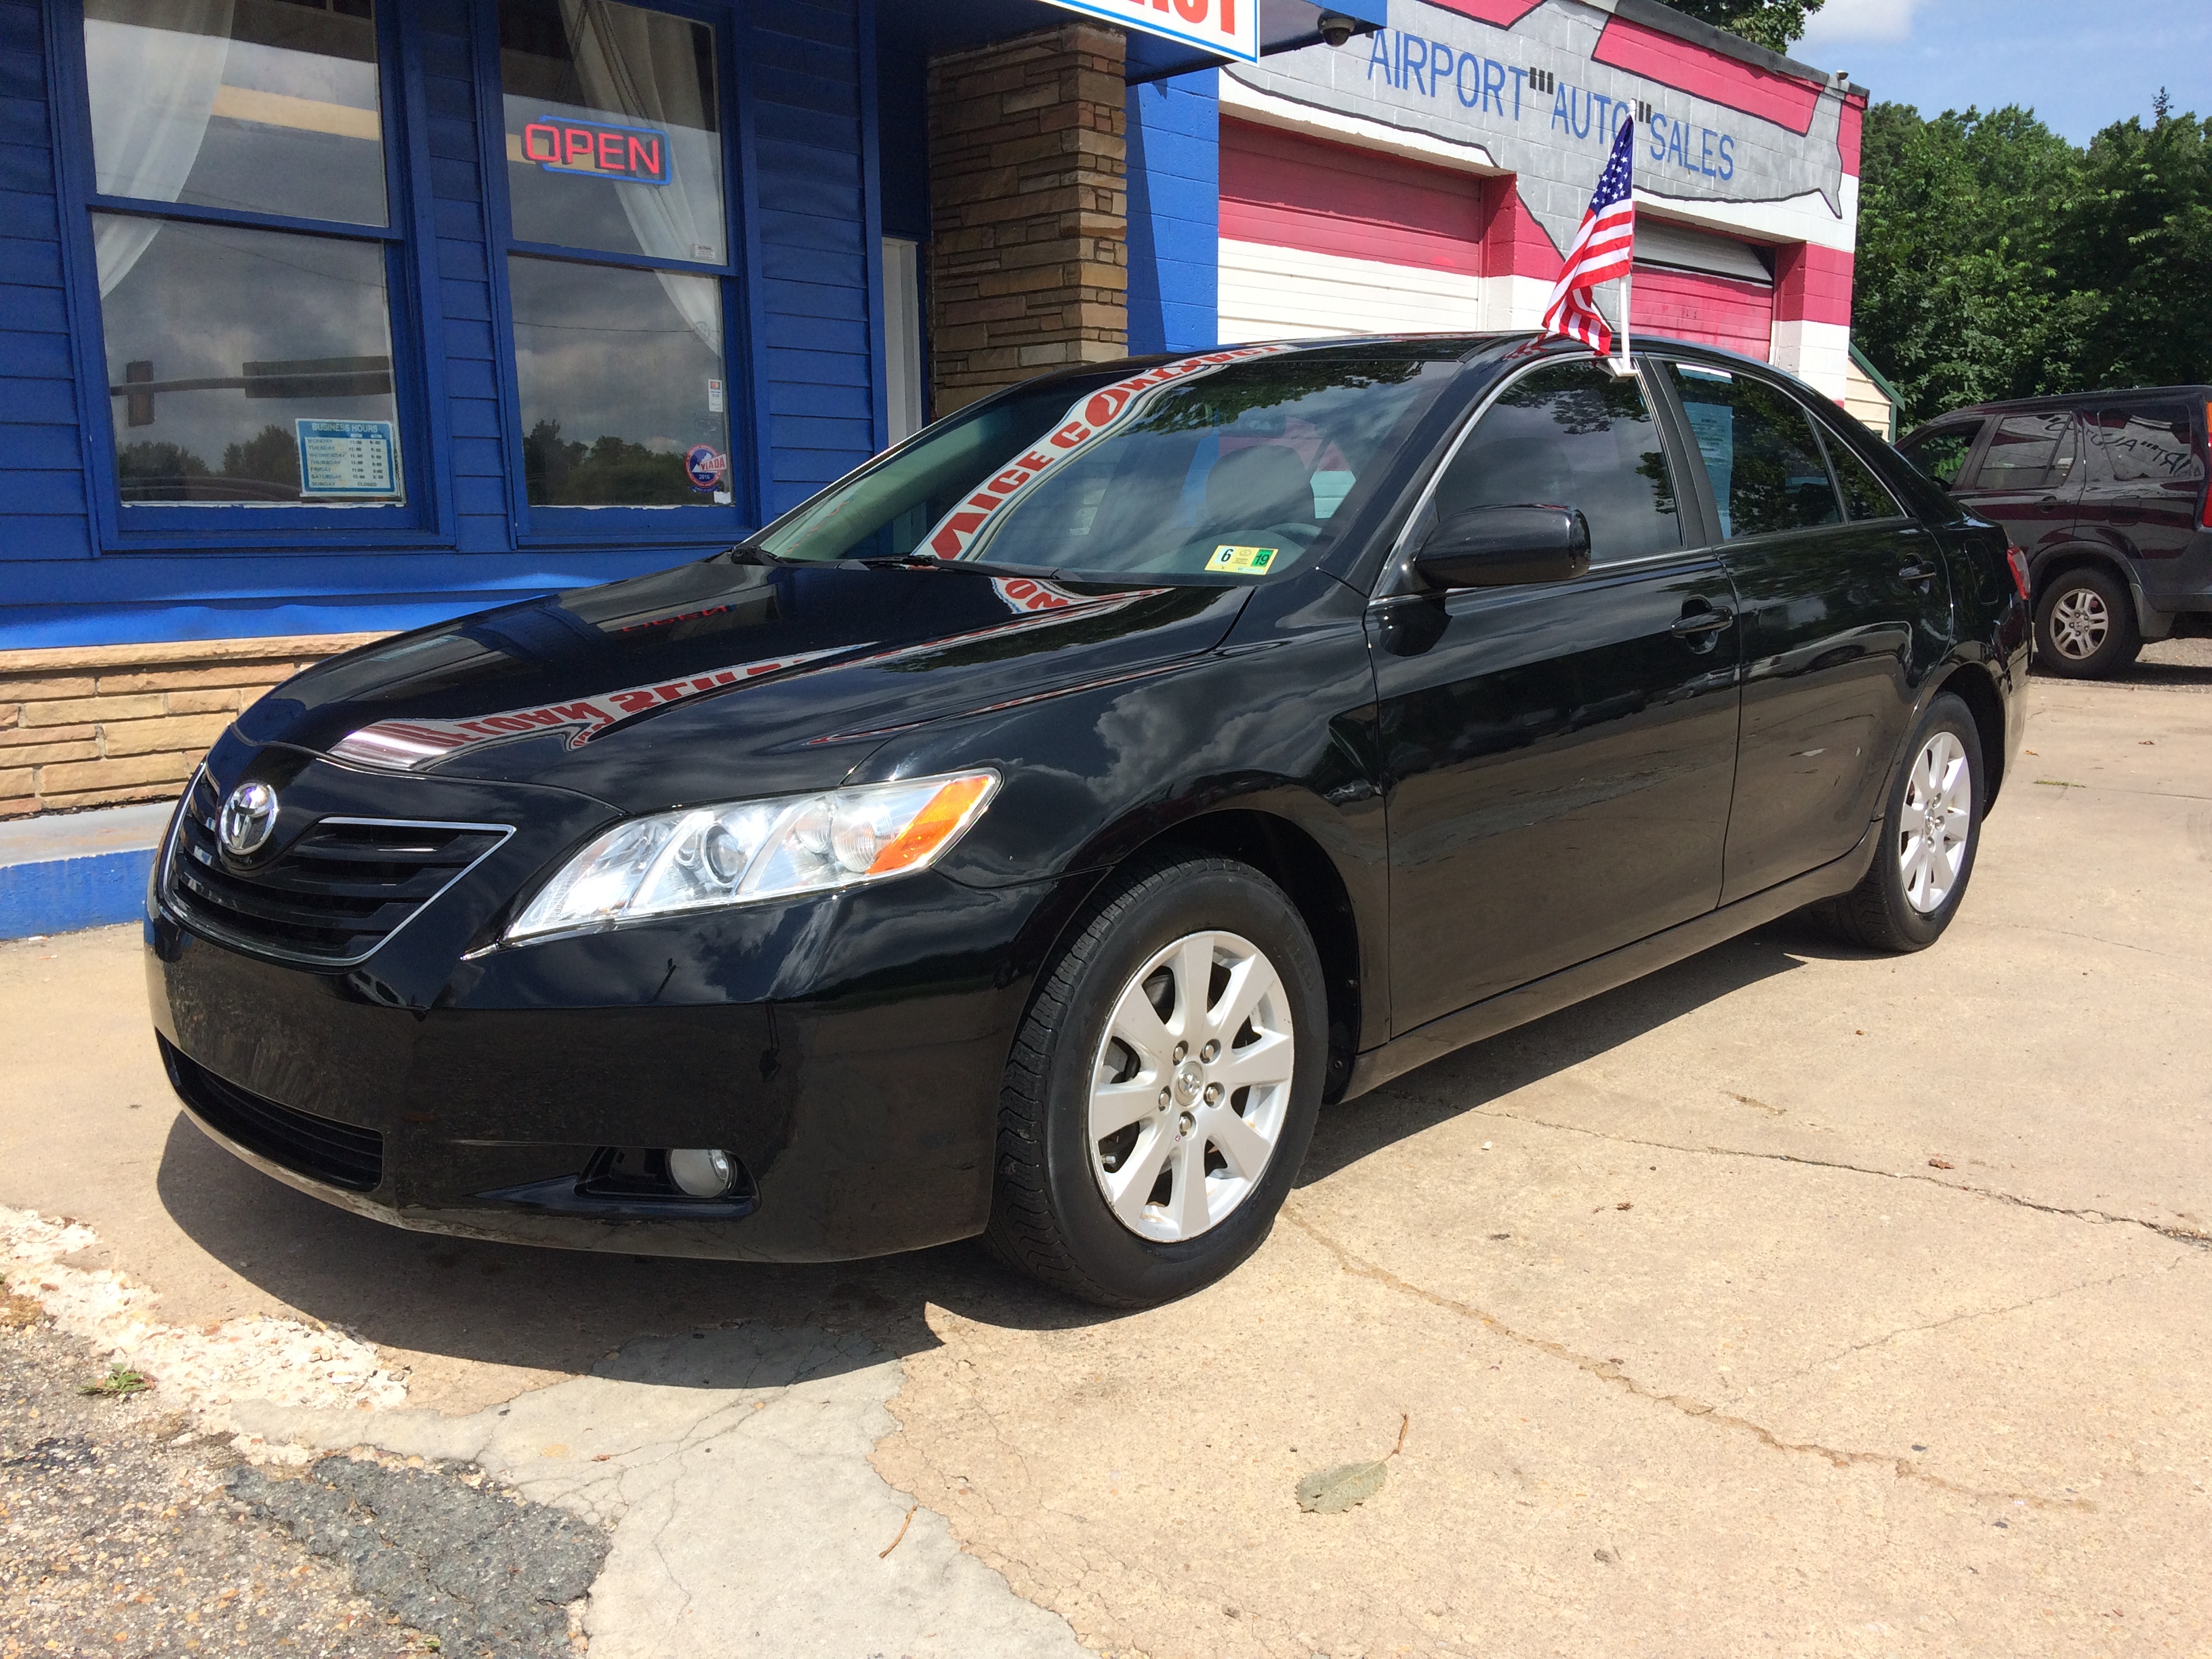 2009 Toyota Camry, Airport Auto Sales - Used Cars for Sale, VA.